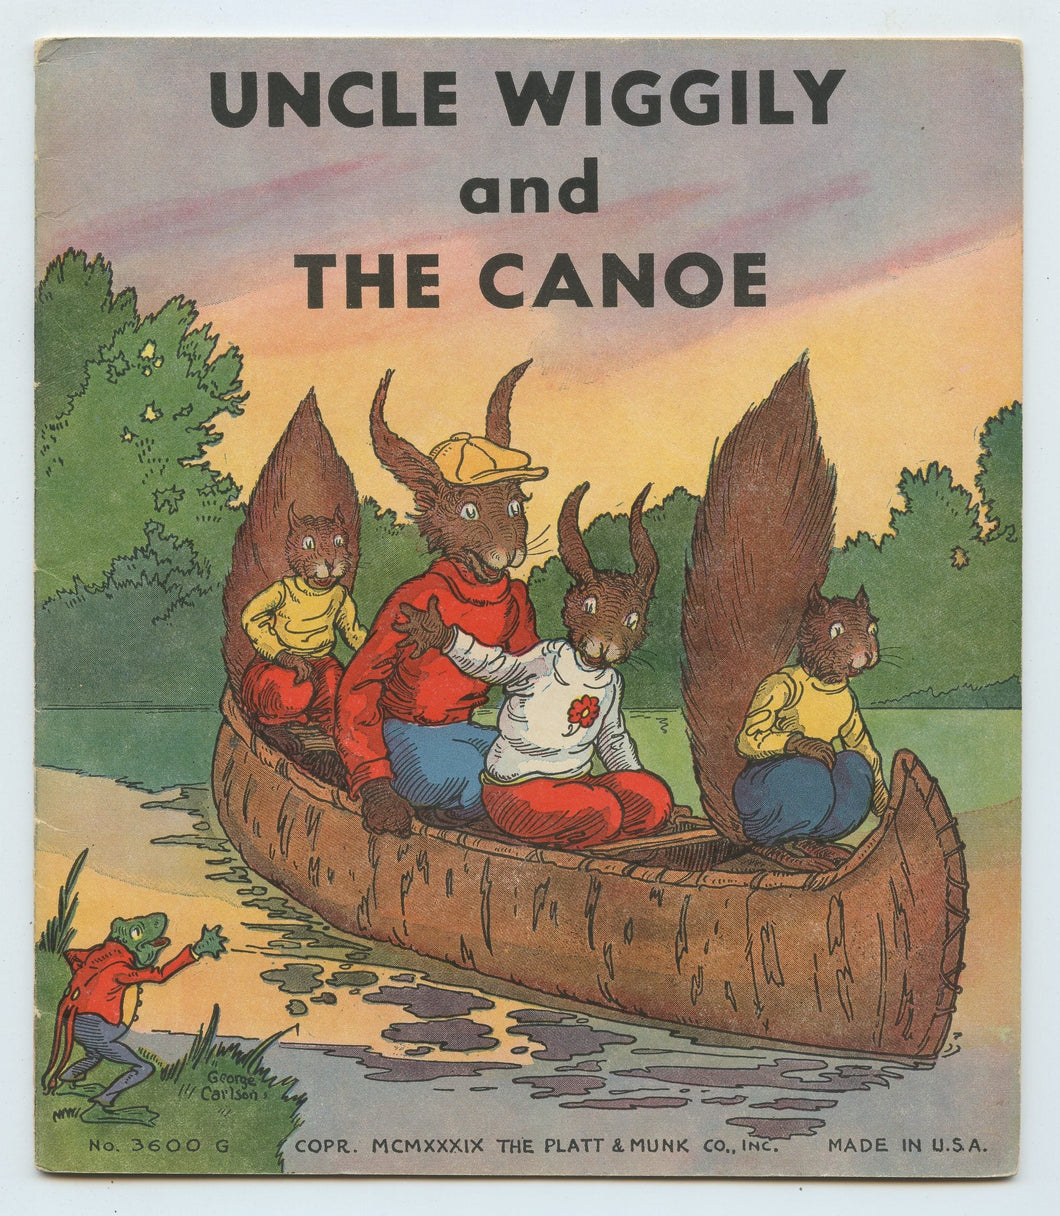 Uncle Wiggily and the Canoe